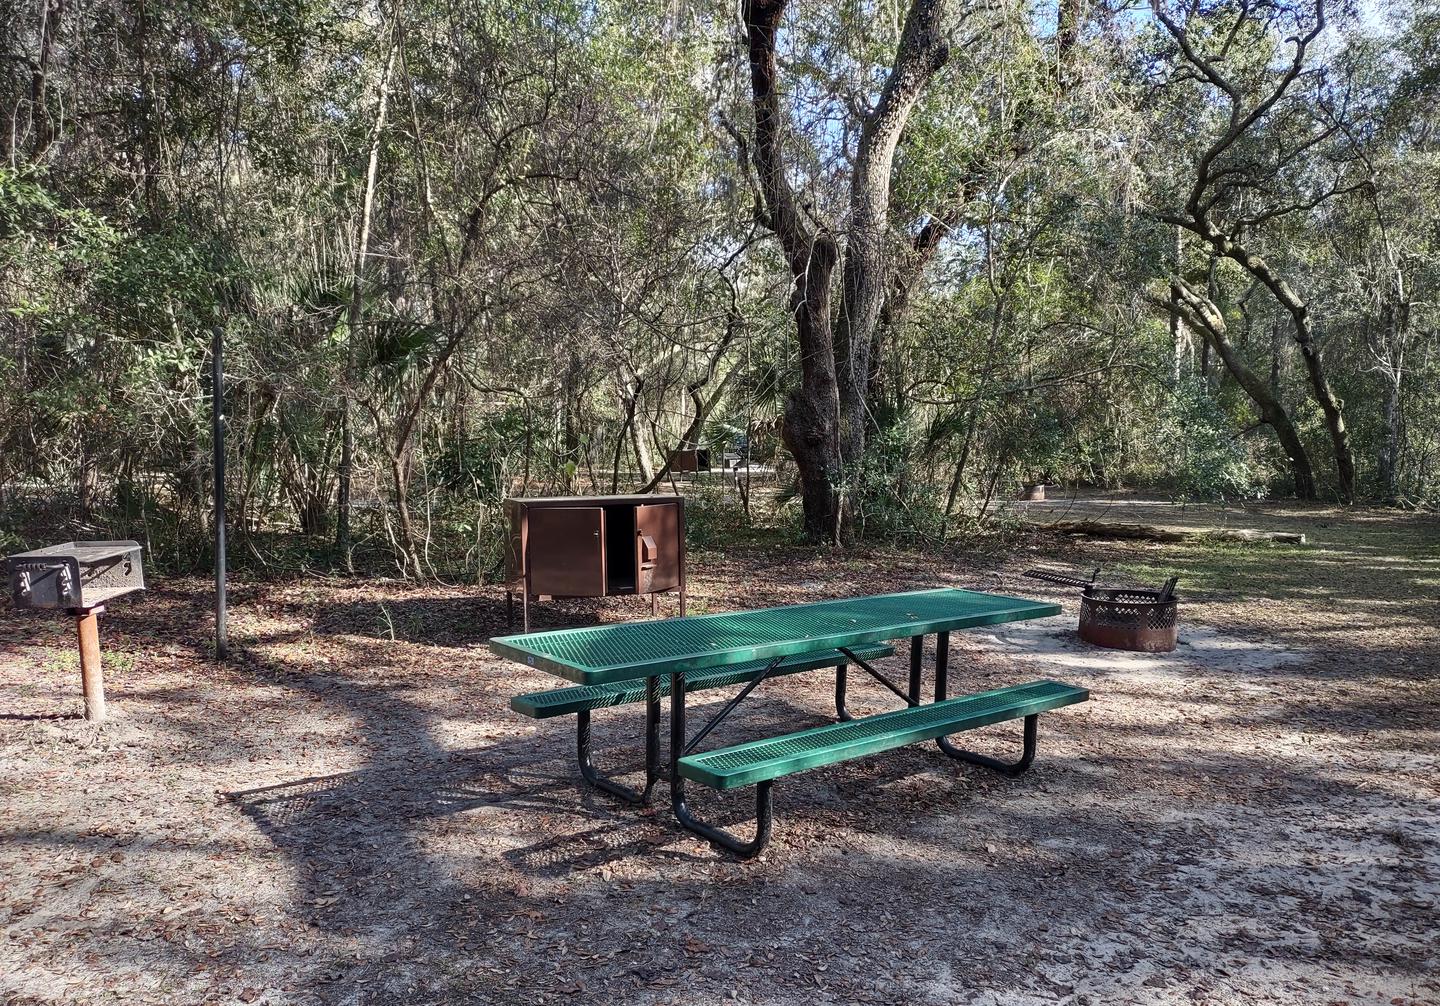 Another view of site 8Amenities: picnic table, grill, fire ring, light pole, bear-proof storage locker